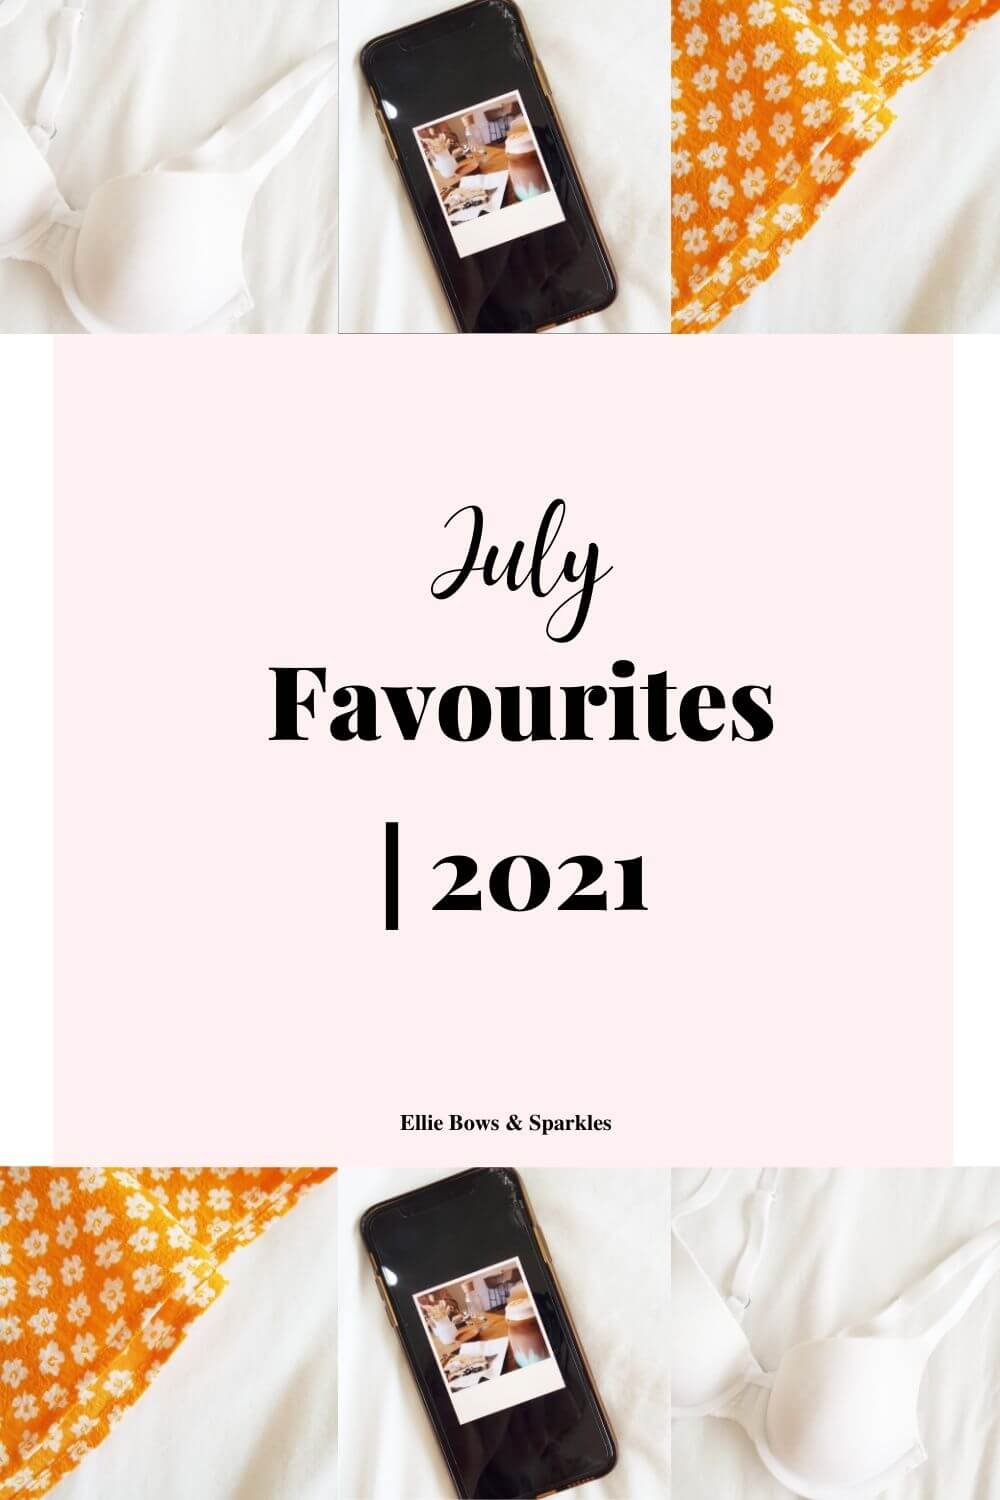 Pinterest pin with both black and handwritten text, on pink centred background, reading "July Favourites 2021", with a top and bottom border of the post pictures featuring my monthly favourites.